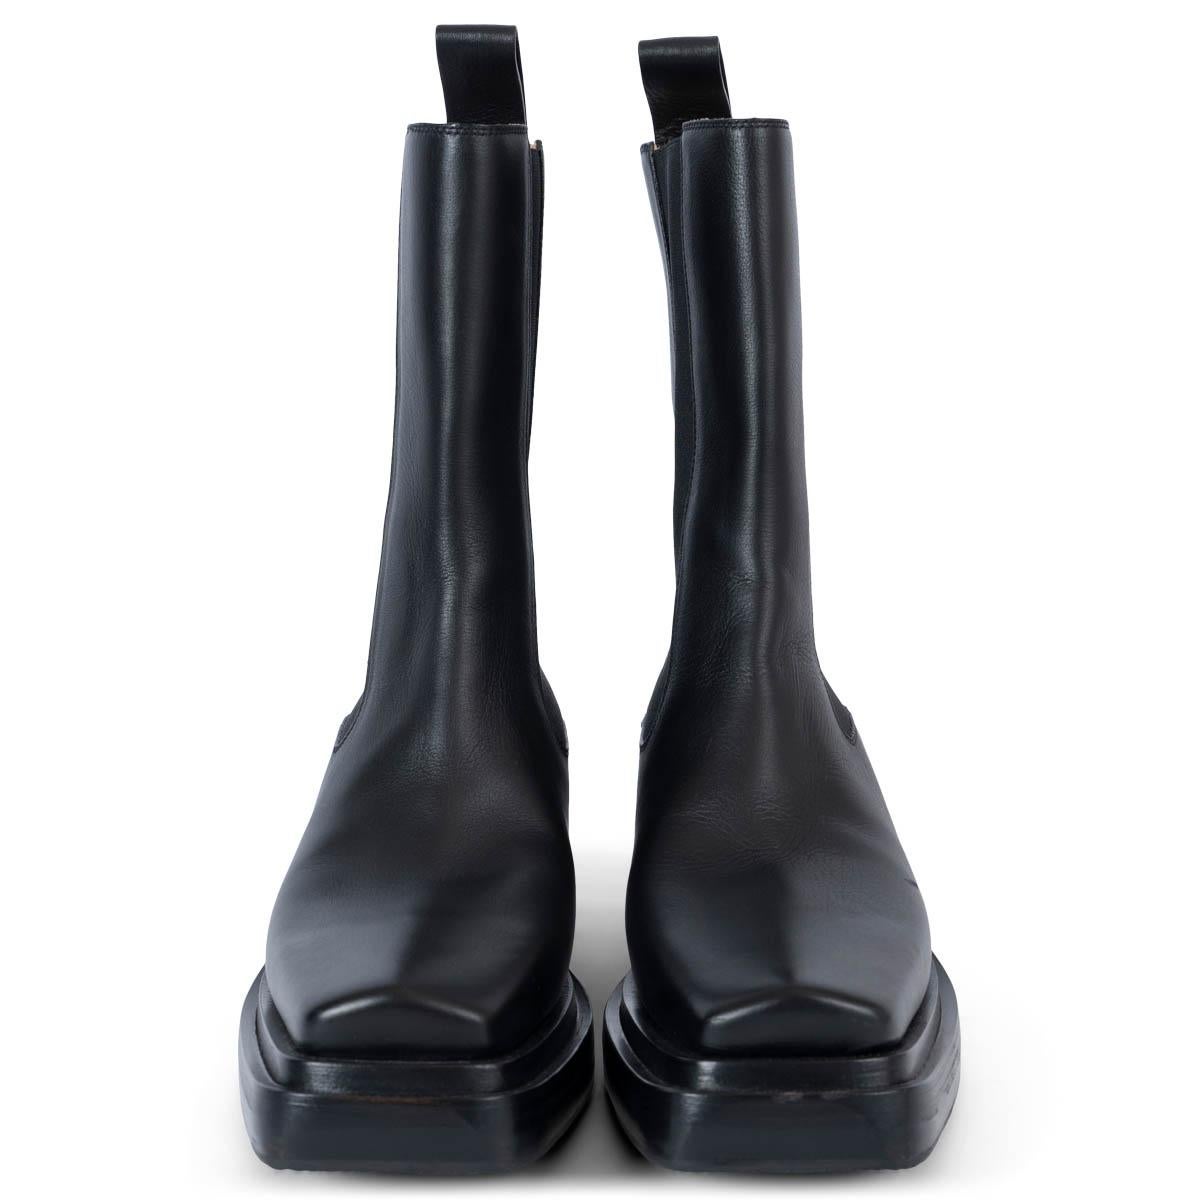 100% authentic Bottega Veneta Lean cowboy boots in smooth black calfskin featuring square toe, elasticated ankles, pull-tab at the heel, calf-length and mid stacked heel. Brand new. Black rubber soles have been added. Come with dust bag. 

2020